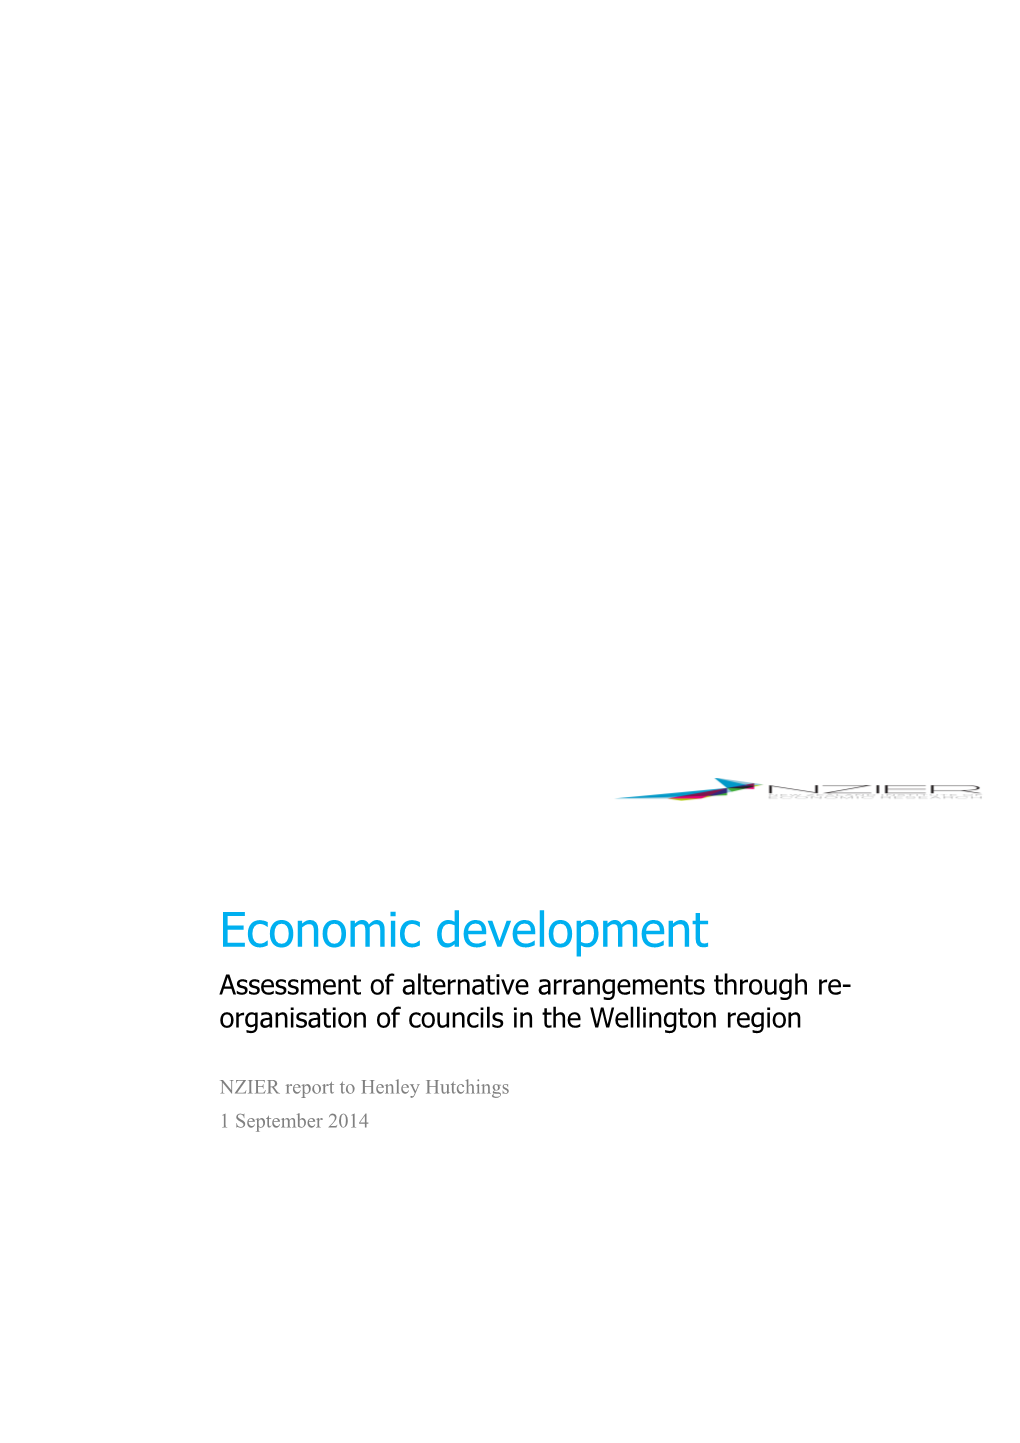 Assessment of Alternative Arrangements Through Re-Organisation of Councils in the Wellington